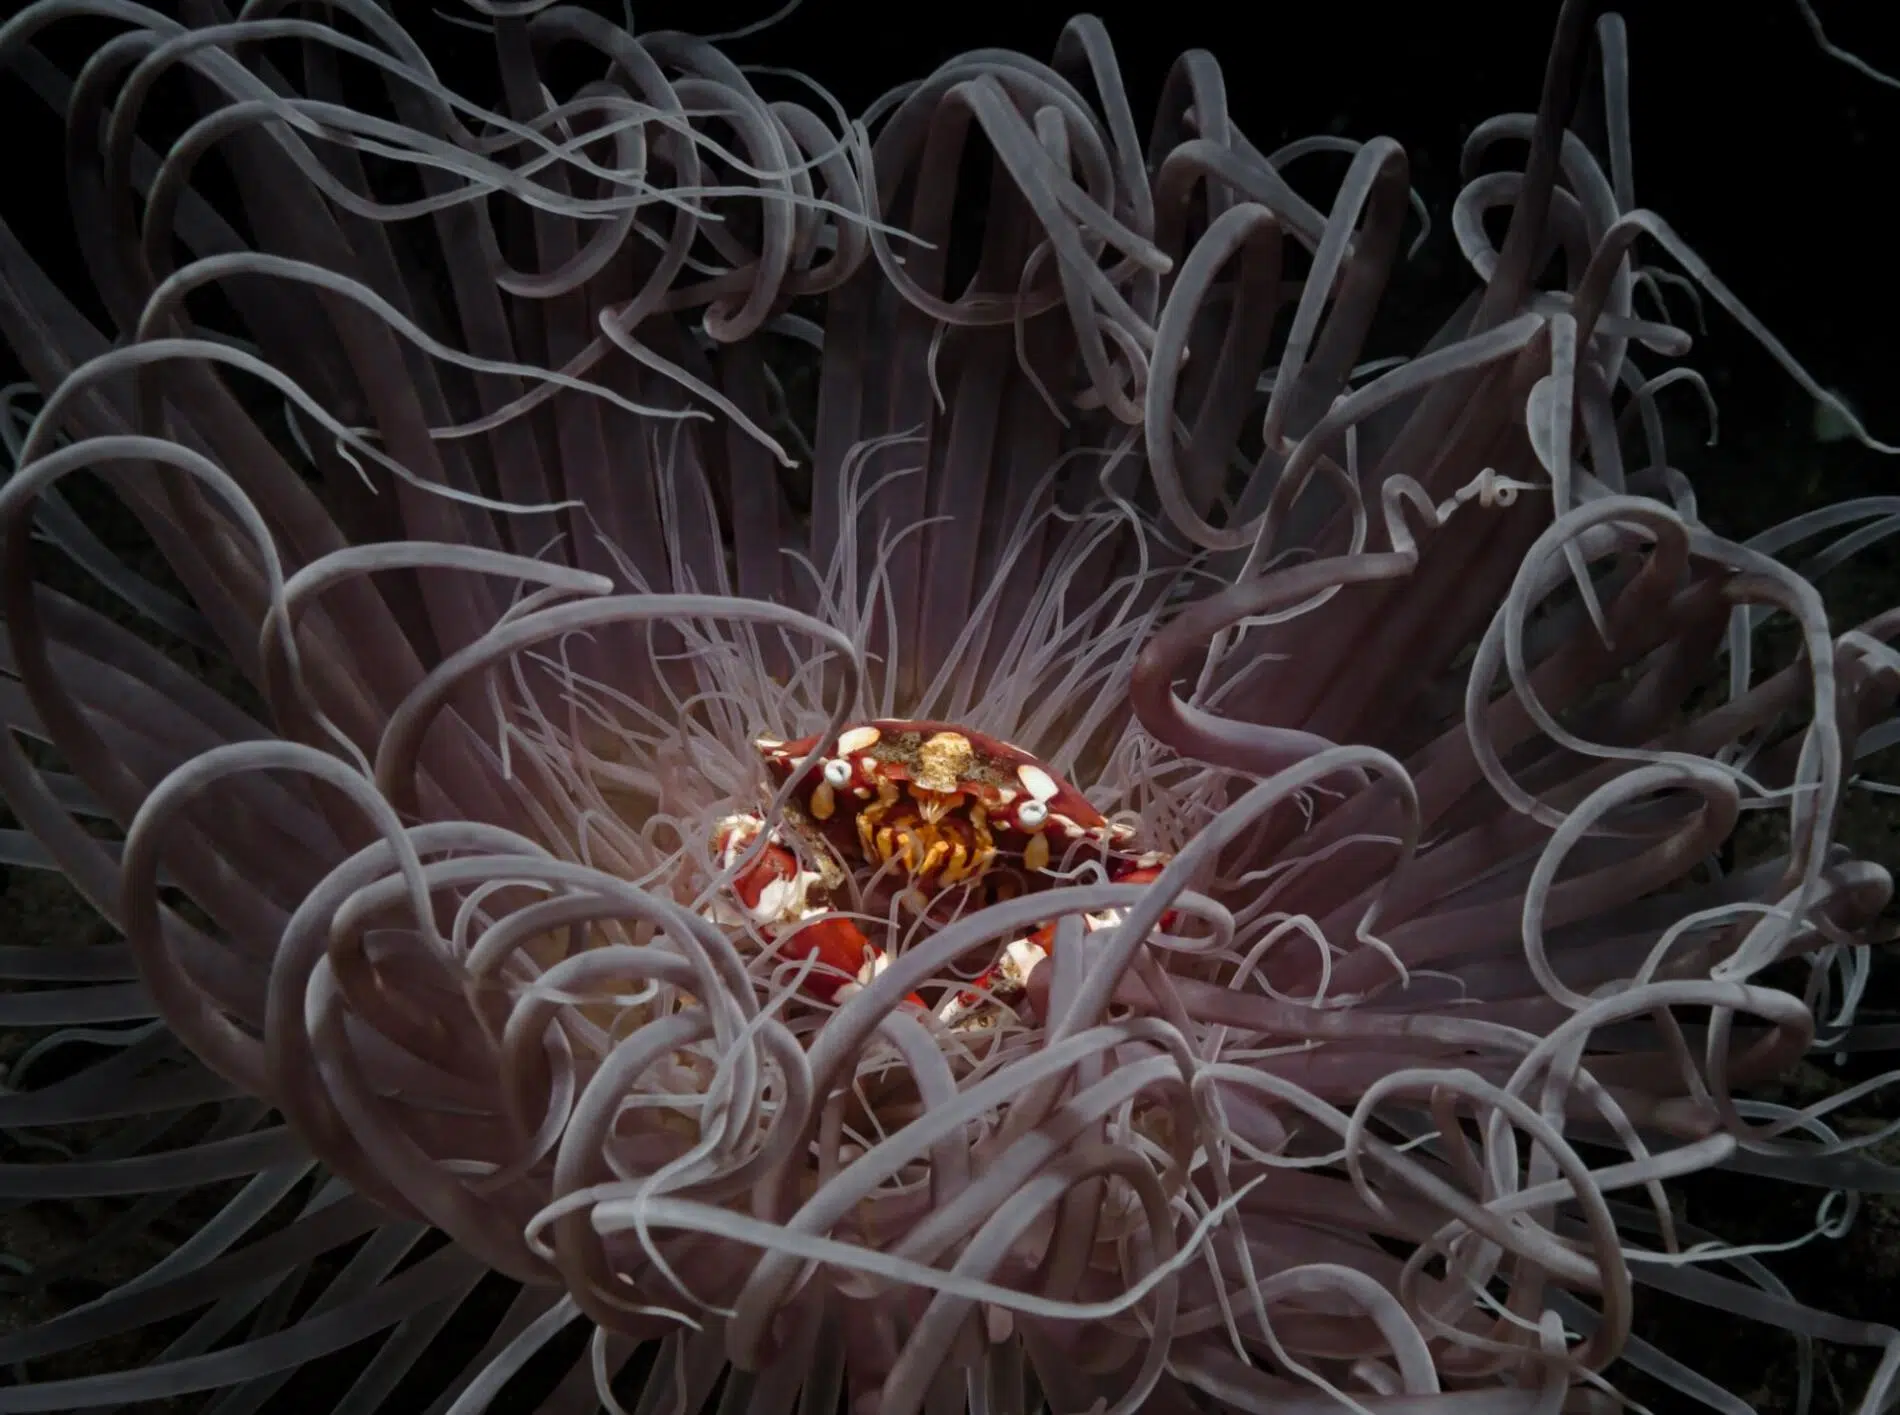 2, Andrei Savin, a crab sits in the centre of a sea anemone as it sways in ocean current, Philippines